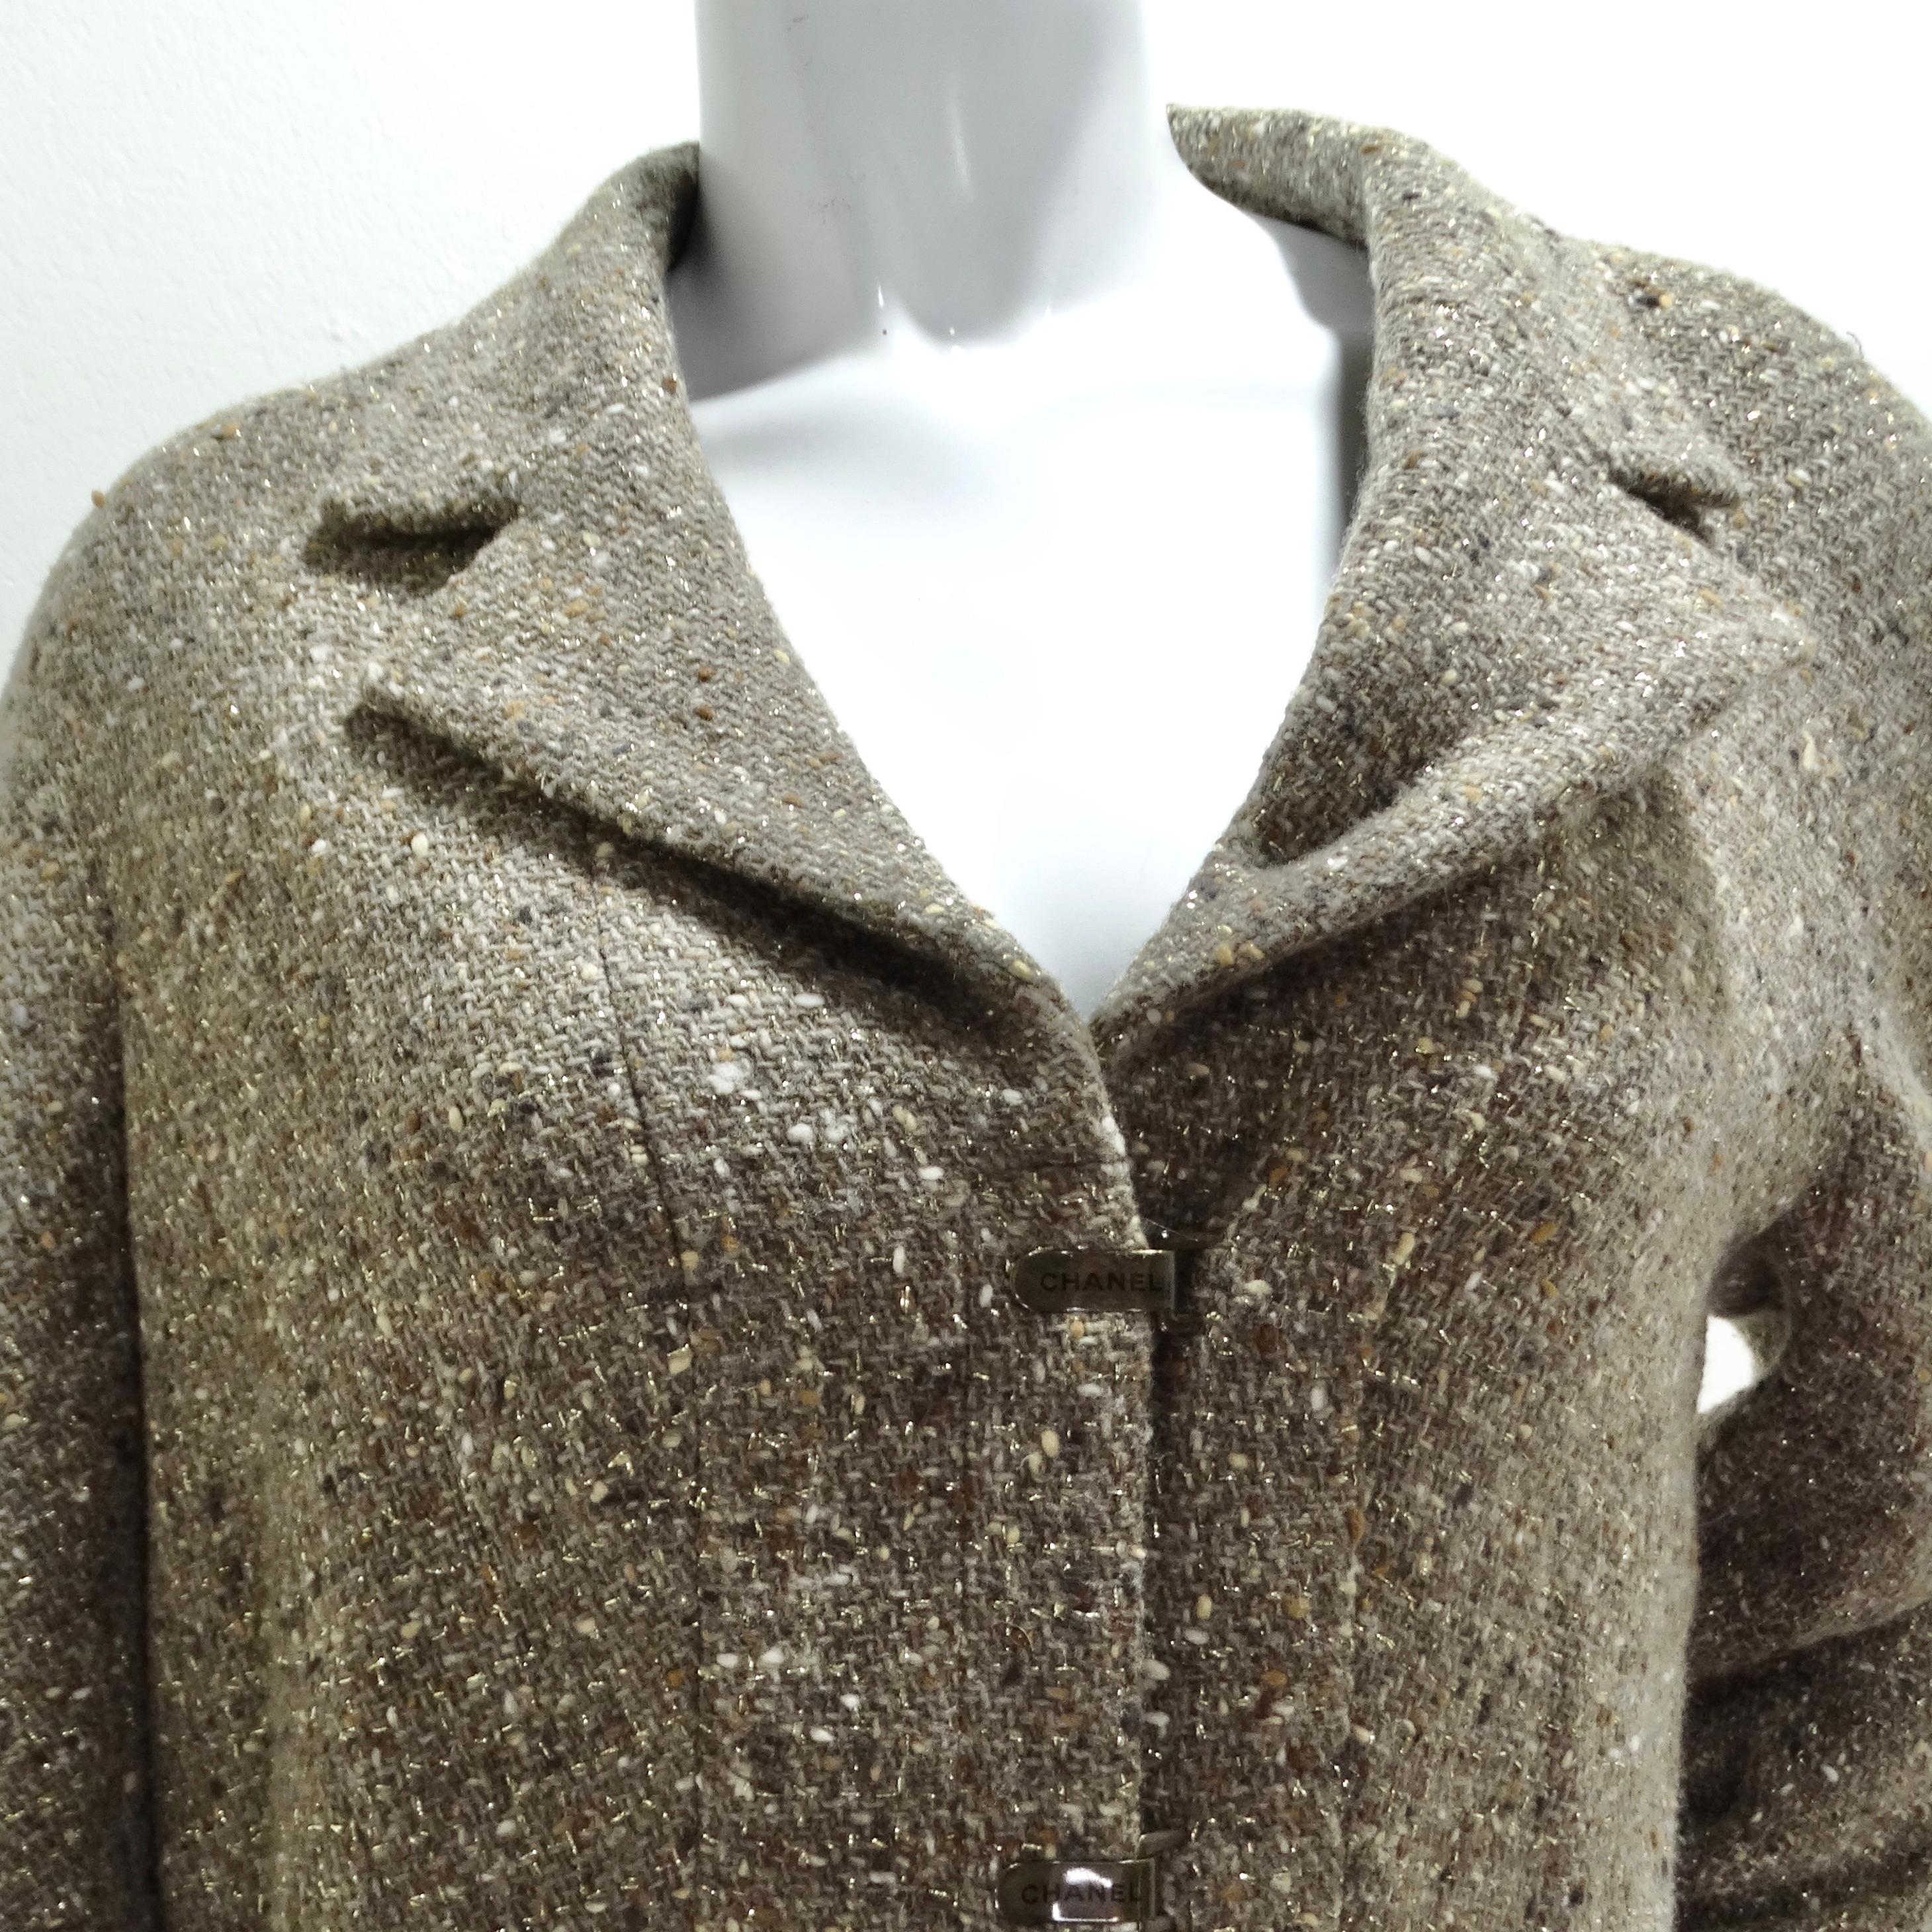 The Chanel 1999 Brown Tweed Blazer is a vintage piece that represents the timeless elegance and craftsmanship for which Chanel is renowned. This blazer, from the late 1990s, is crafted from classic brown tweed, a signature fabric that evokes a sense